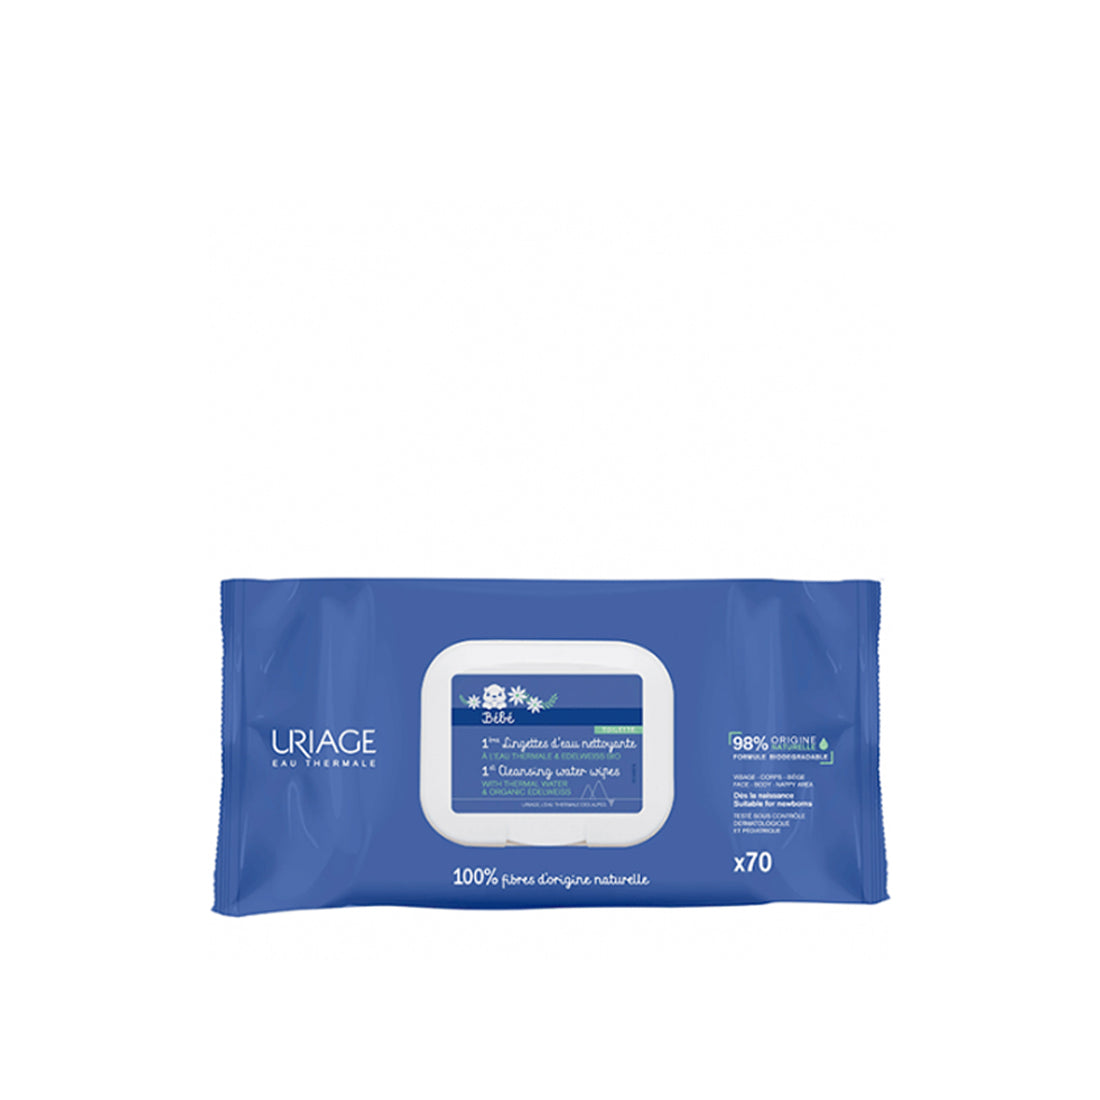 Uriage Baby 1st Cleansing Wipes x70